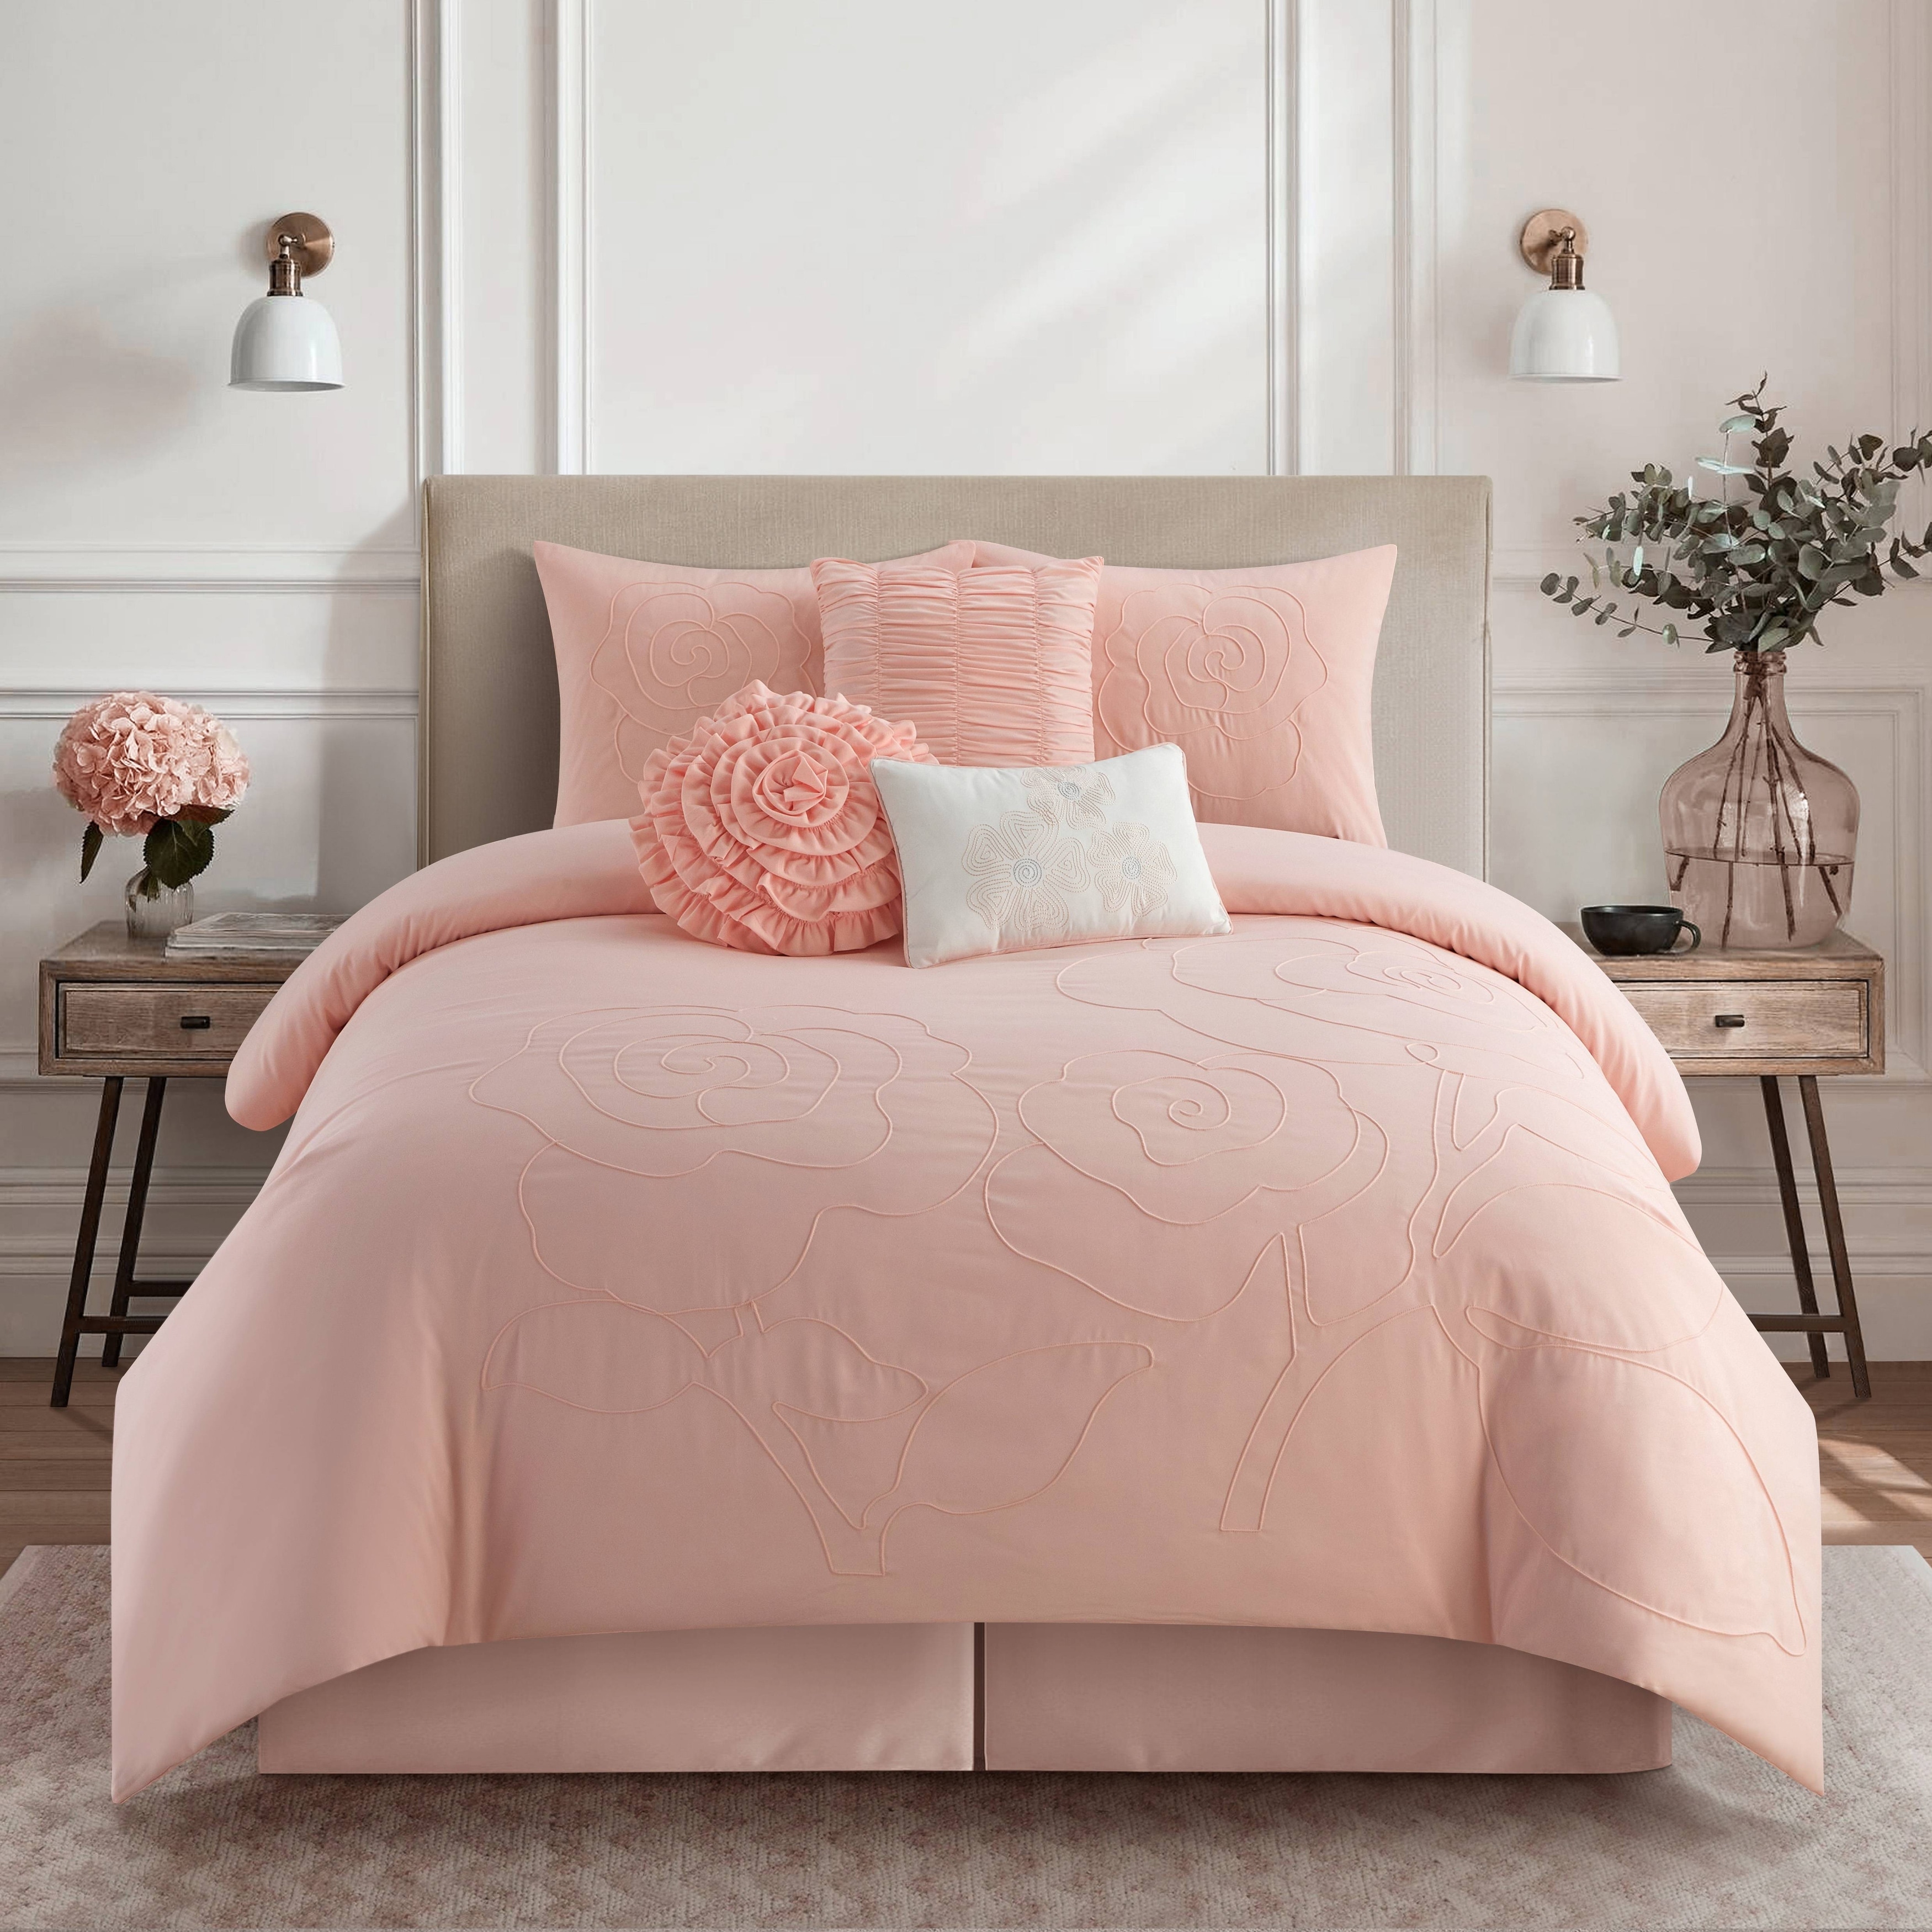 Pink Floral Comforters and Sets - Bed Bath & Beyond